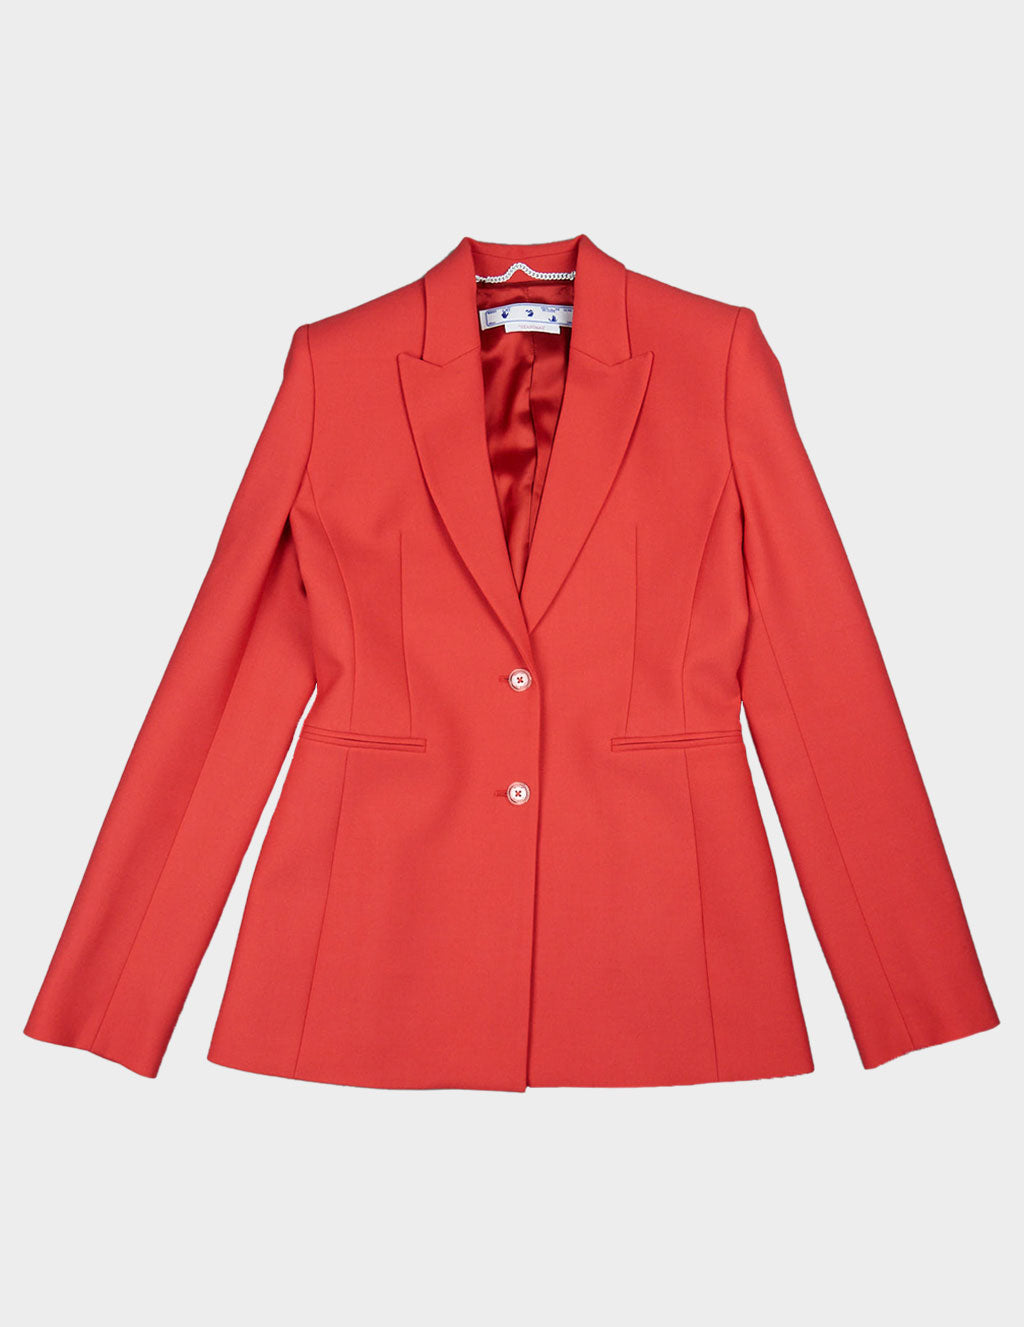 Off-White Women's Corporate SB Jacket product